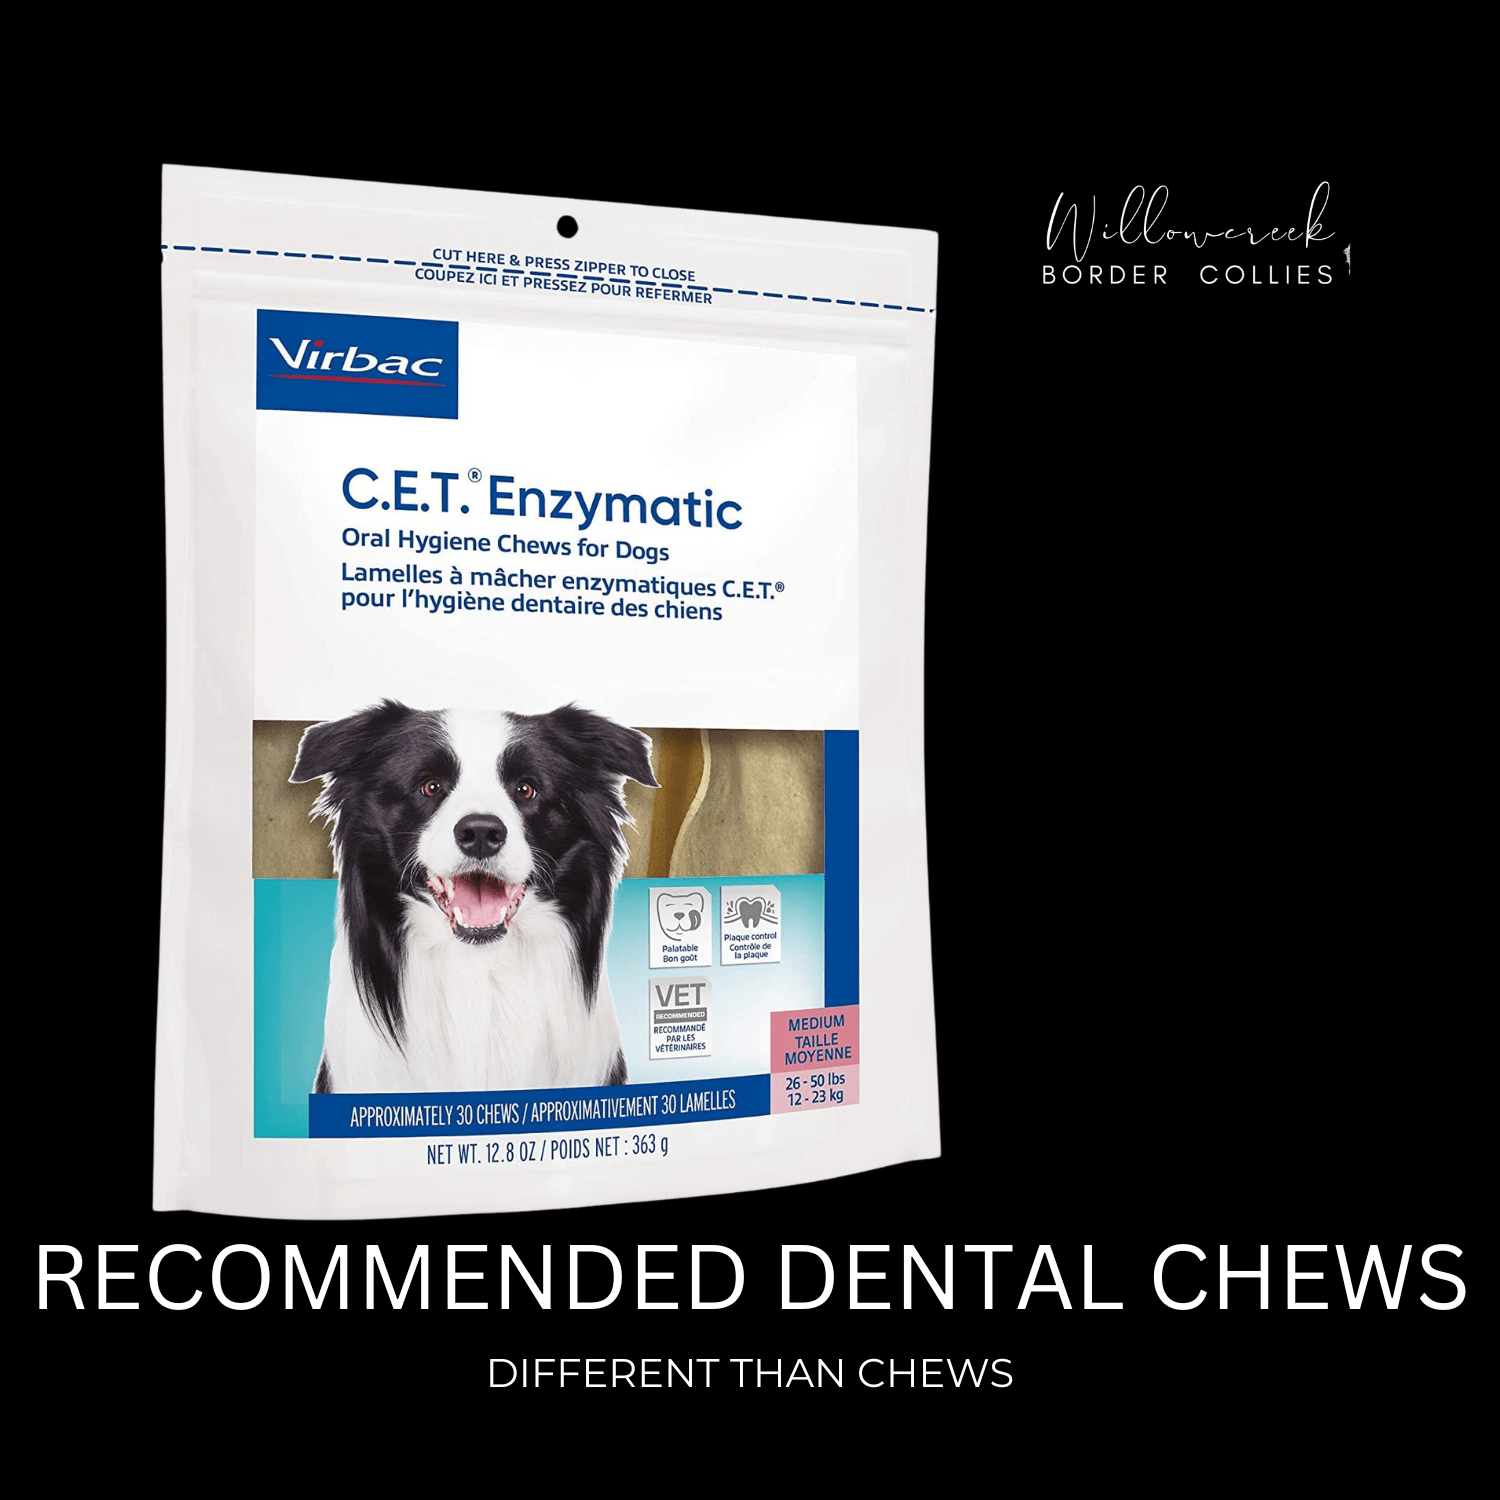 Best dental chews for Puppies & Dogs